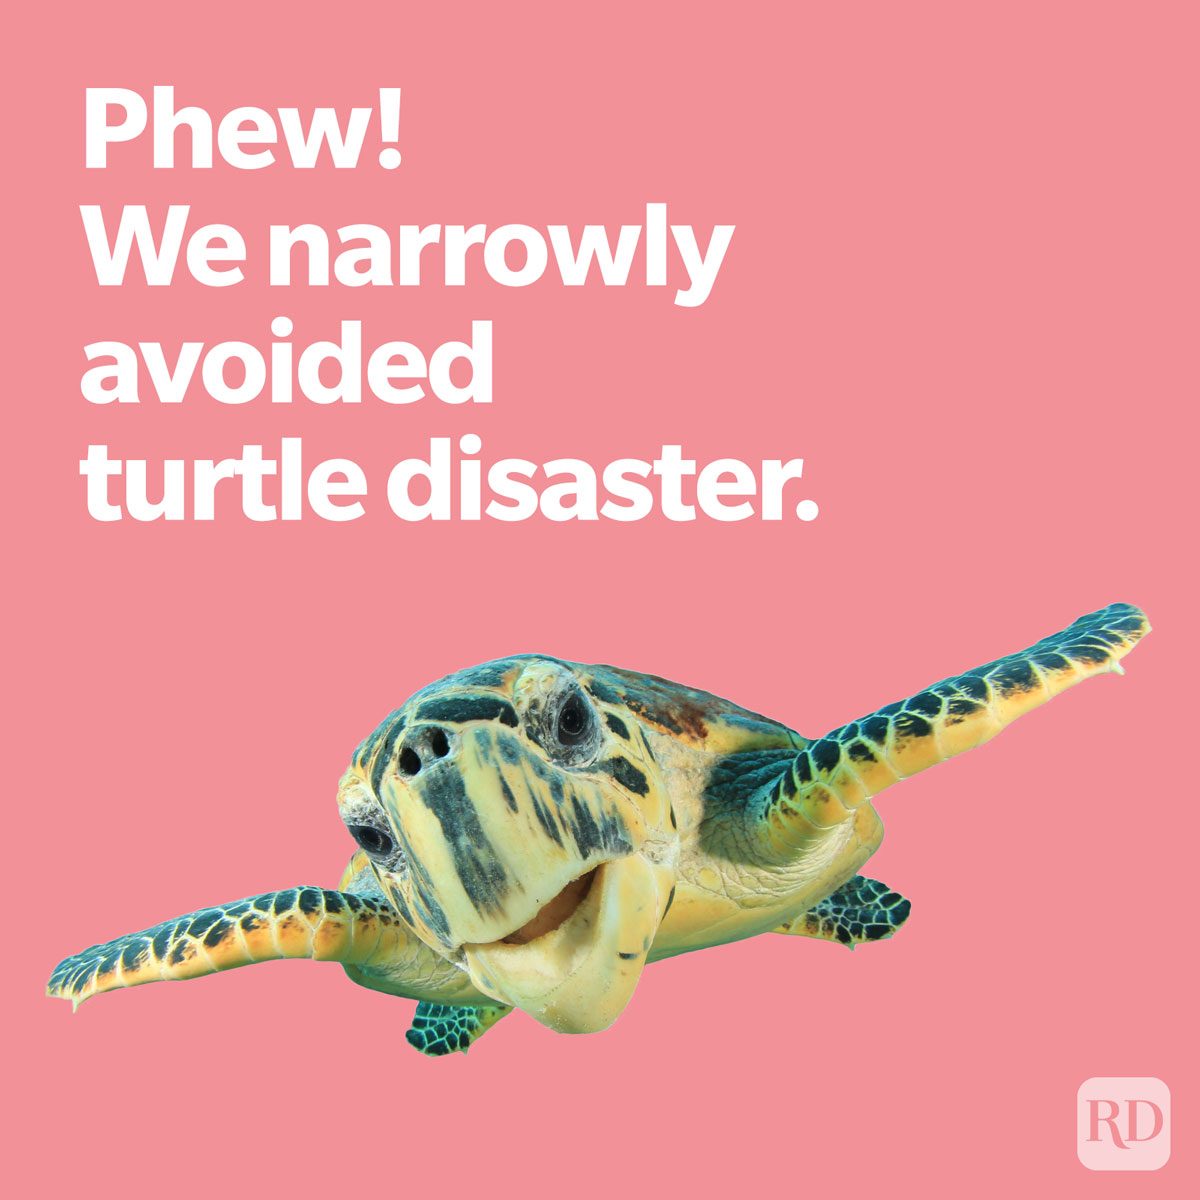 sea creature joke about avoiding turtle disaster featuring a sea turtle on pink background